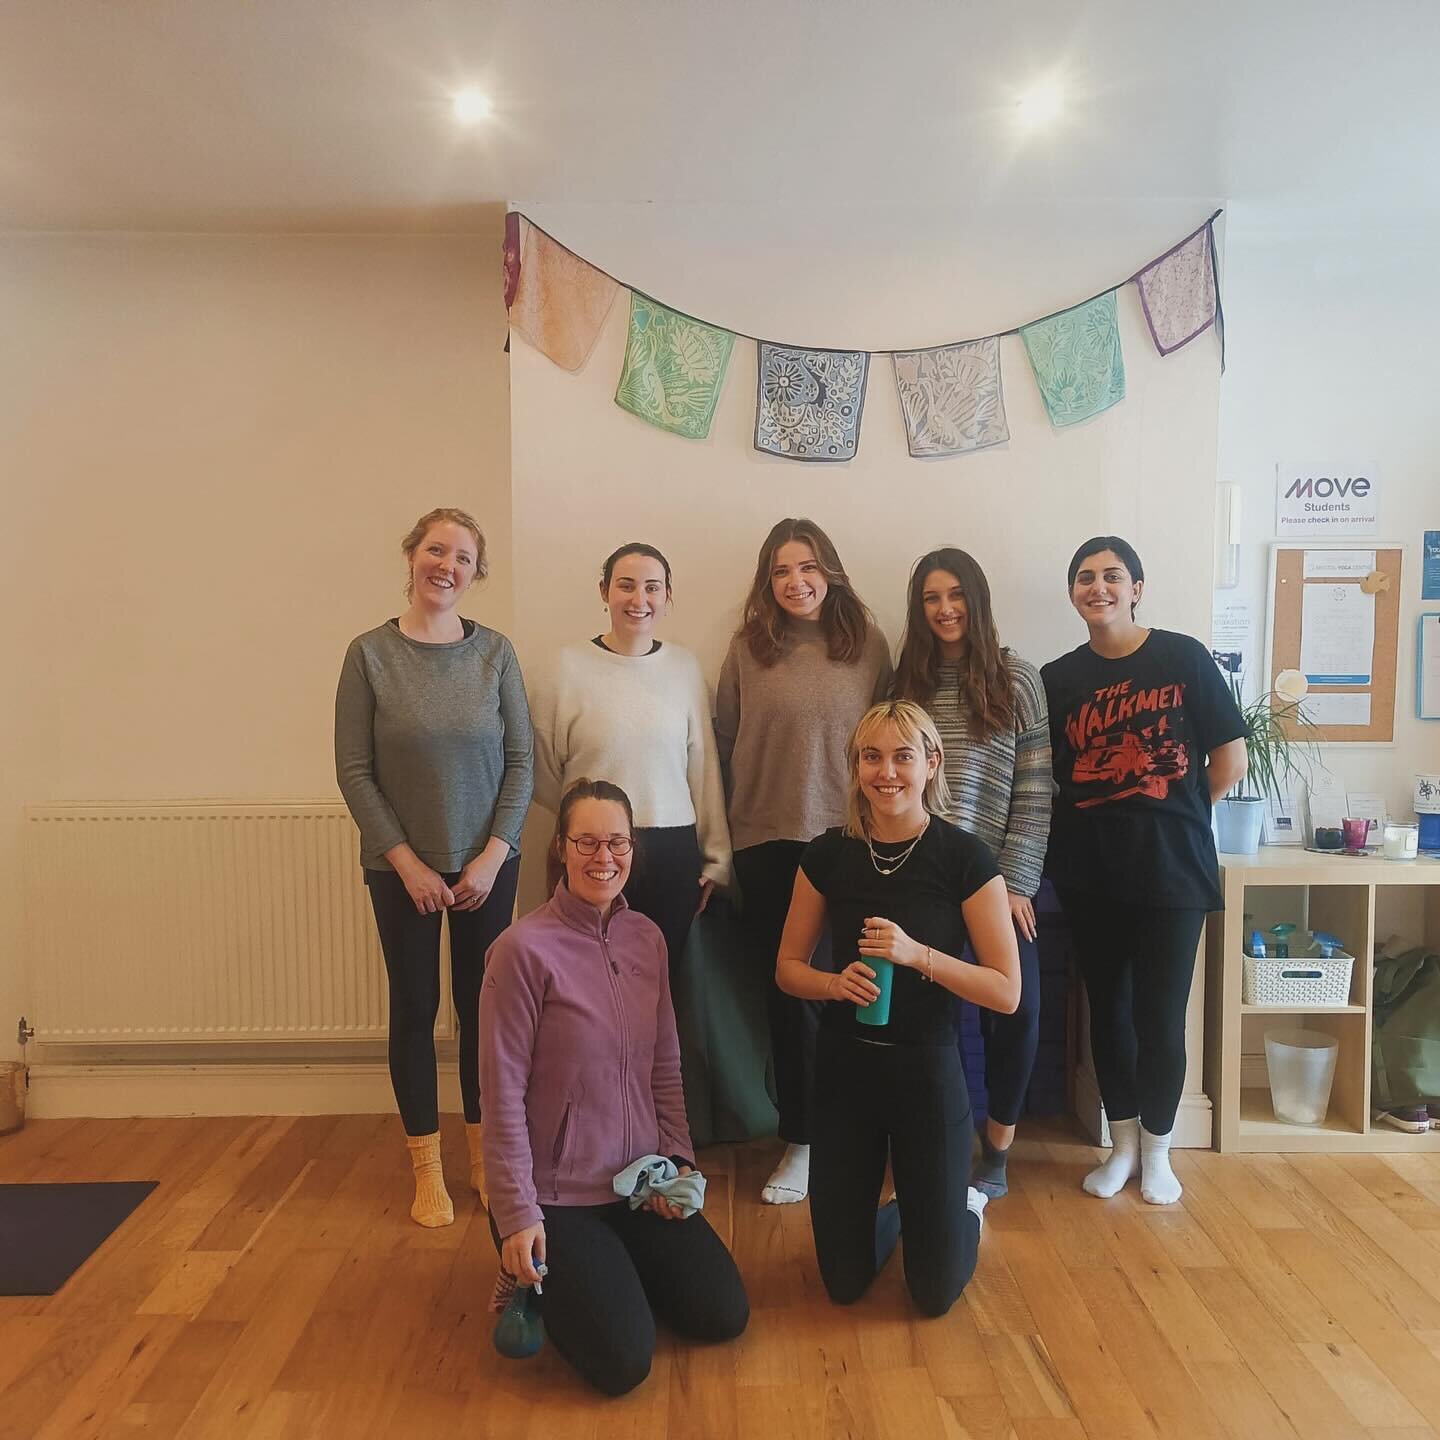 Some of Vikki&rsquo;s lovely yoga students 💕 today!
Vikki&rsquo;s bi weekly yoga class is on Saturday from 11-12pm. 

She teaches Hatha yoga and works as a full time physiotherapist at the BRI. She combines traditional yoga with the latest scientifi